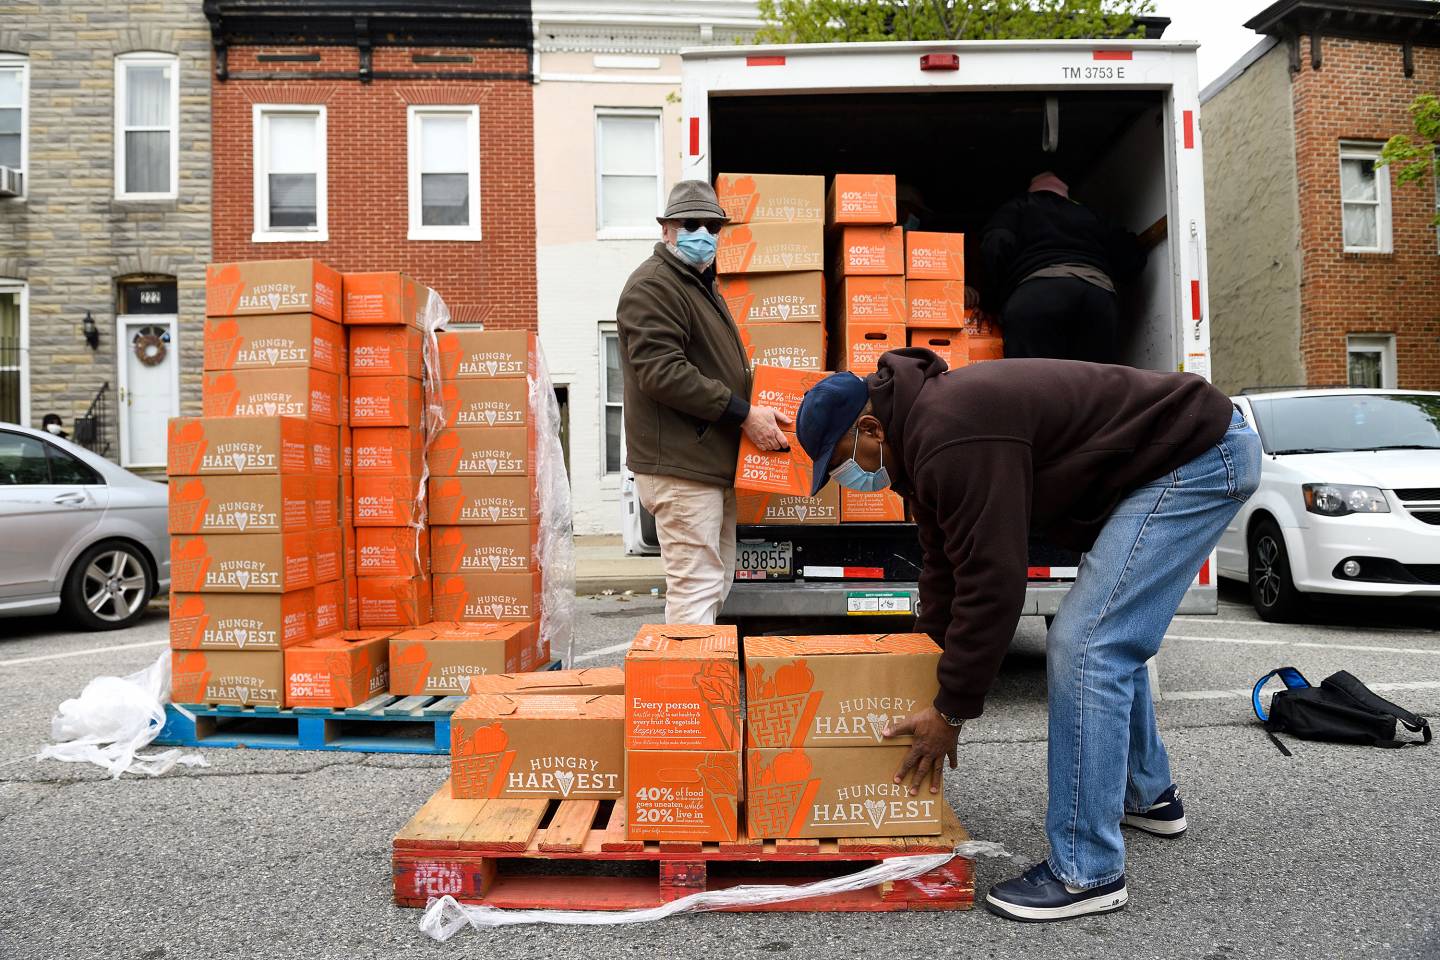 Volunteers deliver boxes of food as part of East Baltimore food distribution initiative